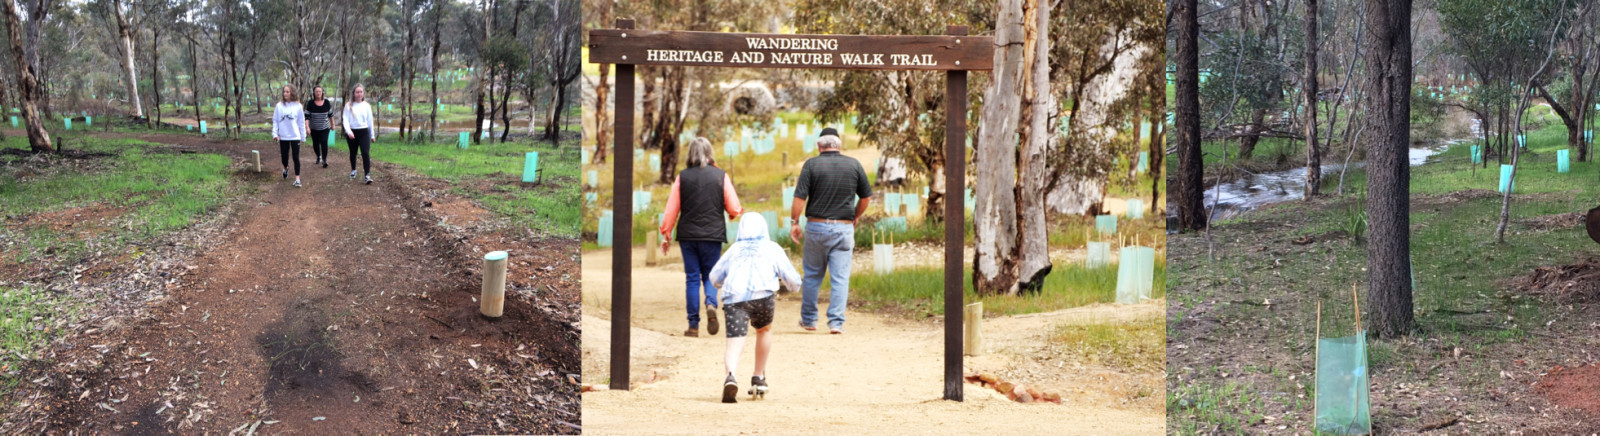 Wandering Heritage and Nature Trail